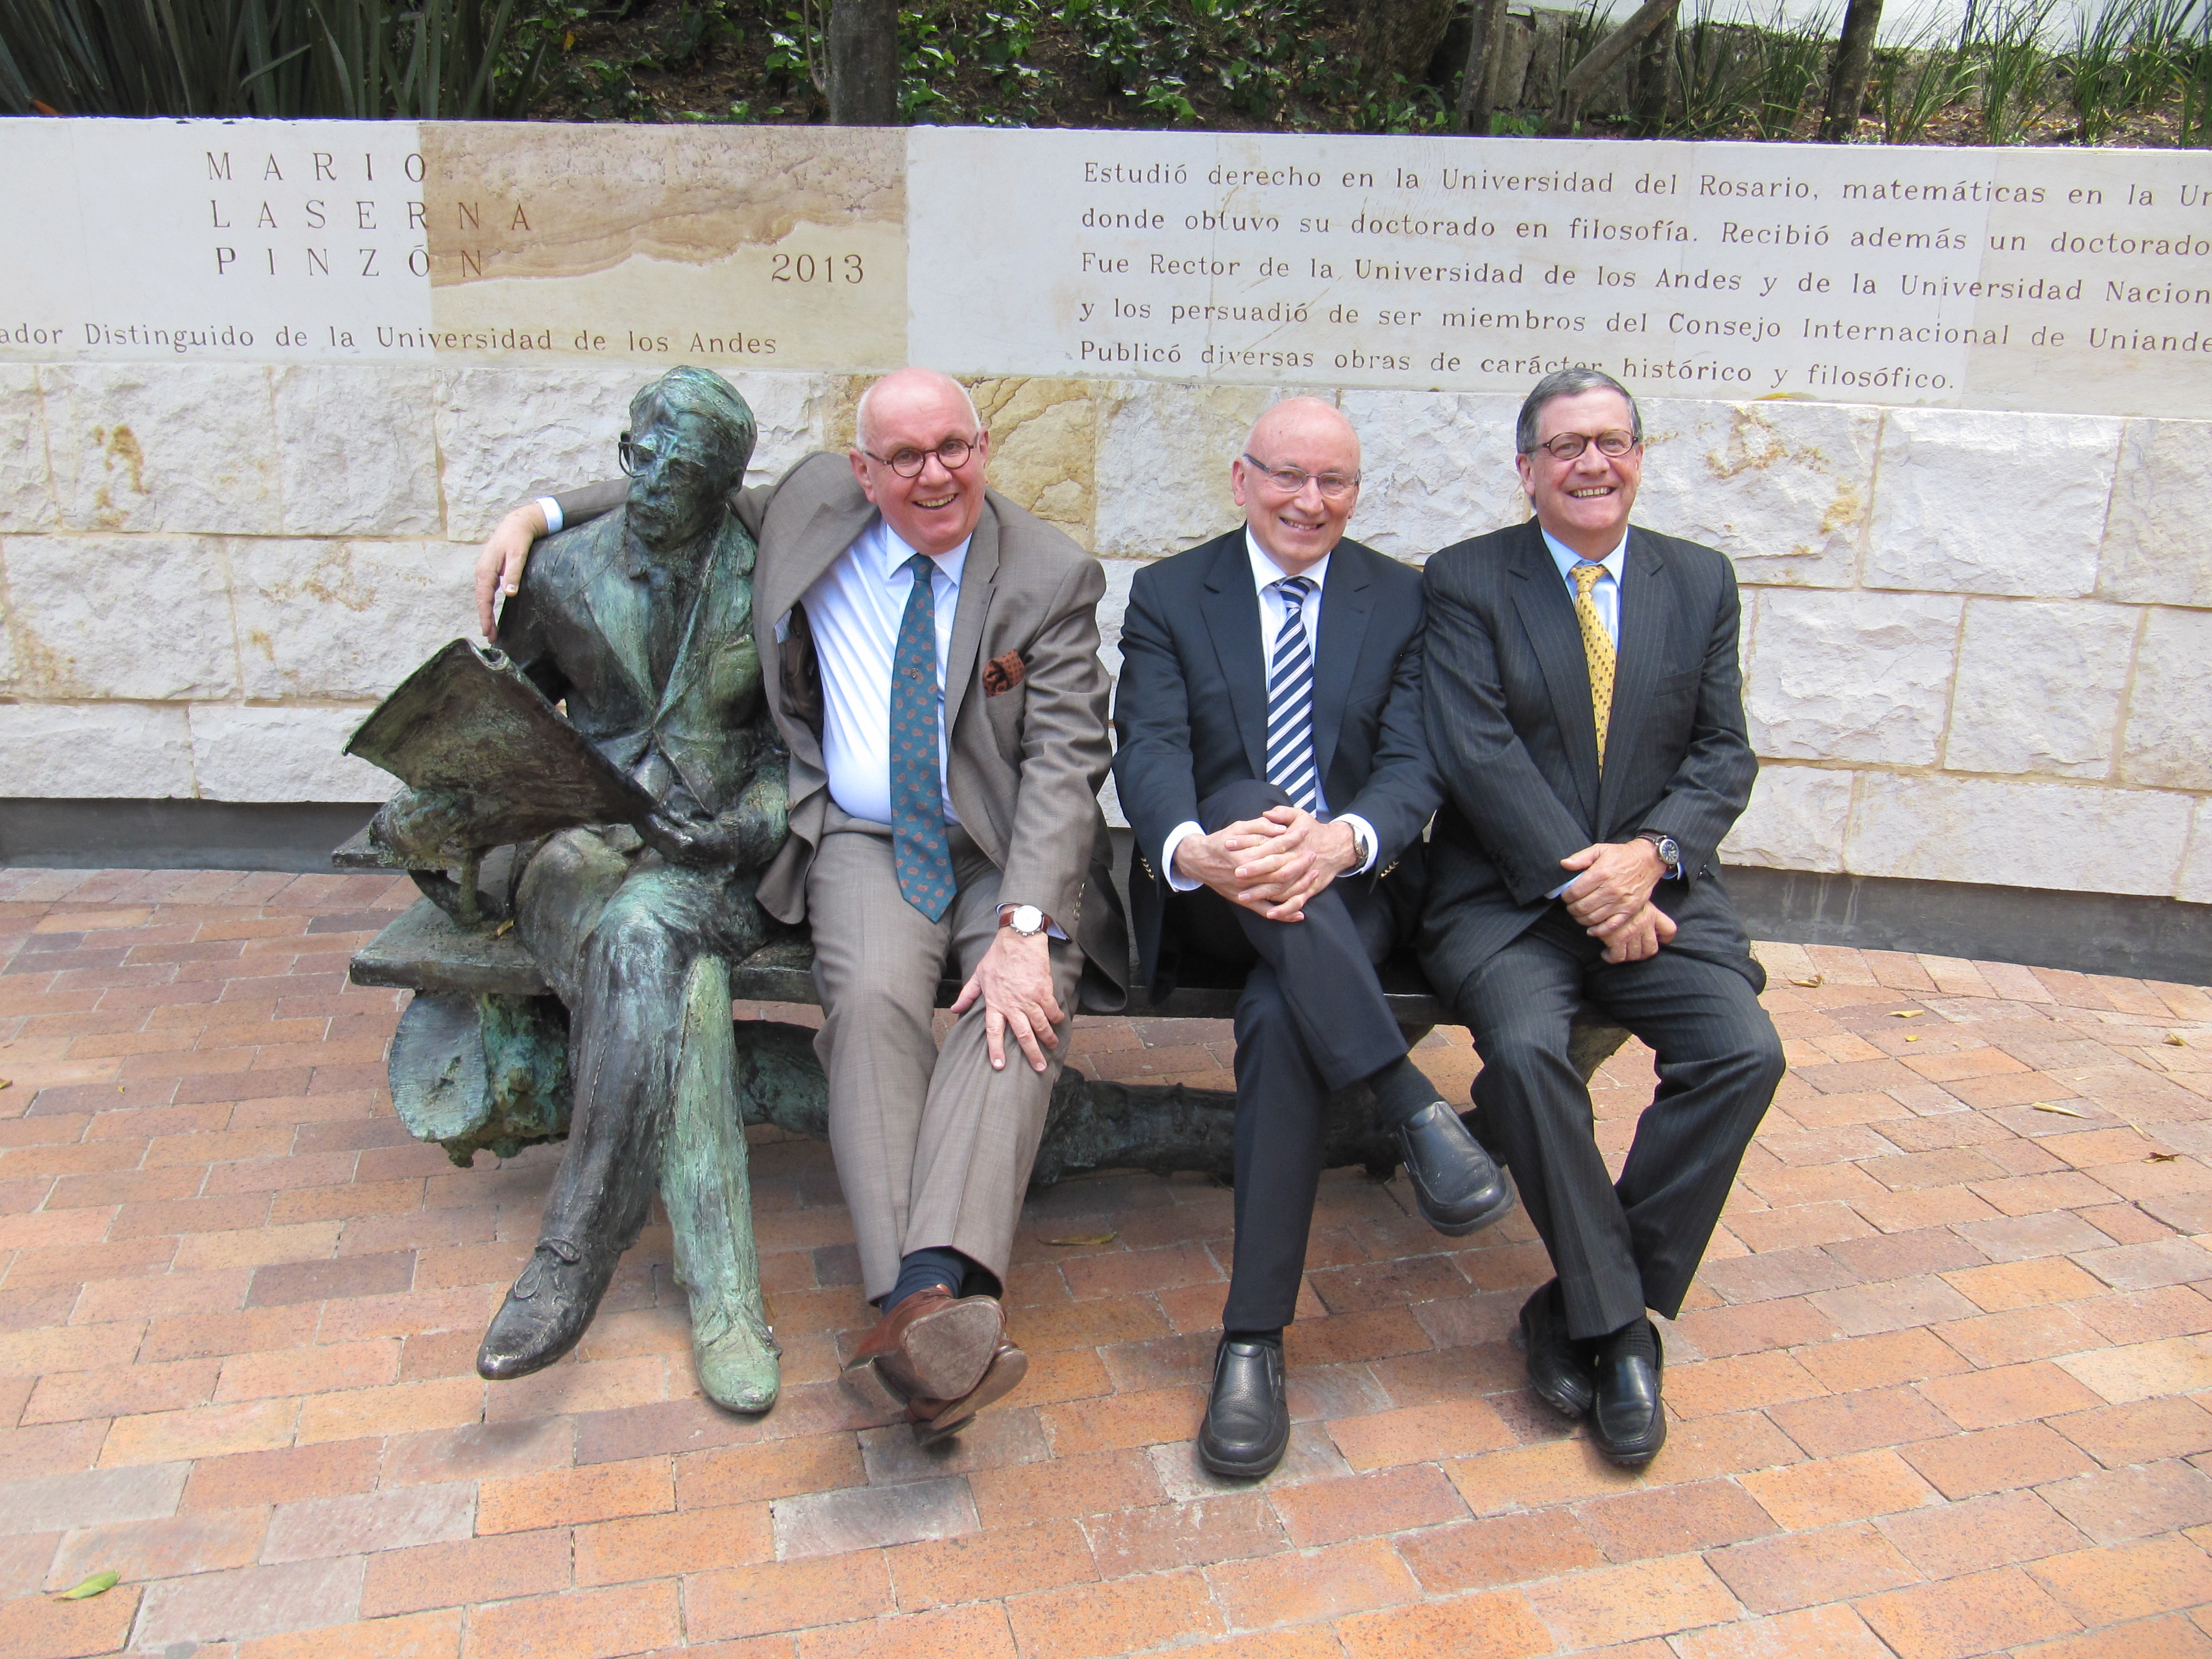 At the memorial of Mario Laserna Pinzón, founder of the Universidad de los Andes (from left to right): Prof. Dr. Peter Strohschneider; Prof. Dr. Wolfgang Ertmer, DFG Vice President; and Prof. Dr. Pablo Navas, Rector of the Universidad de los Andes.